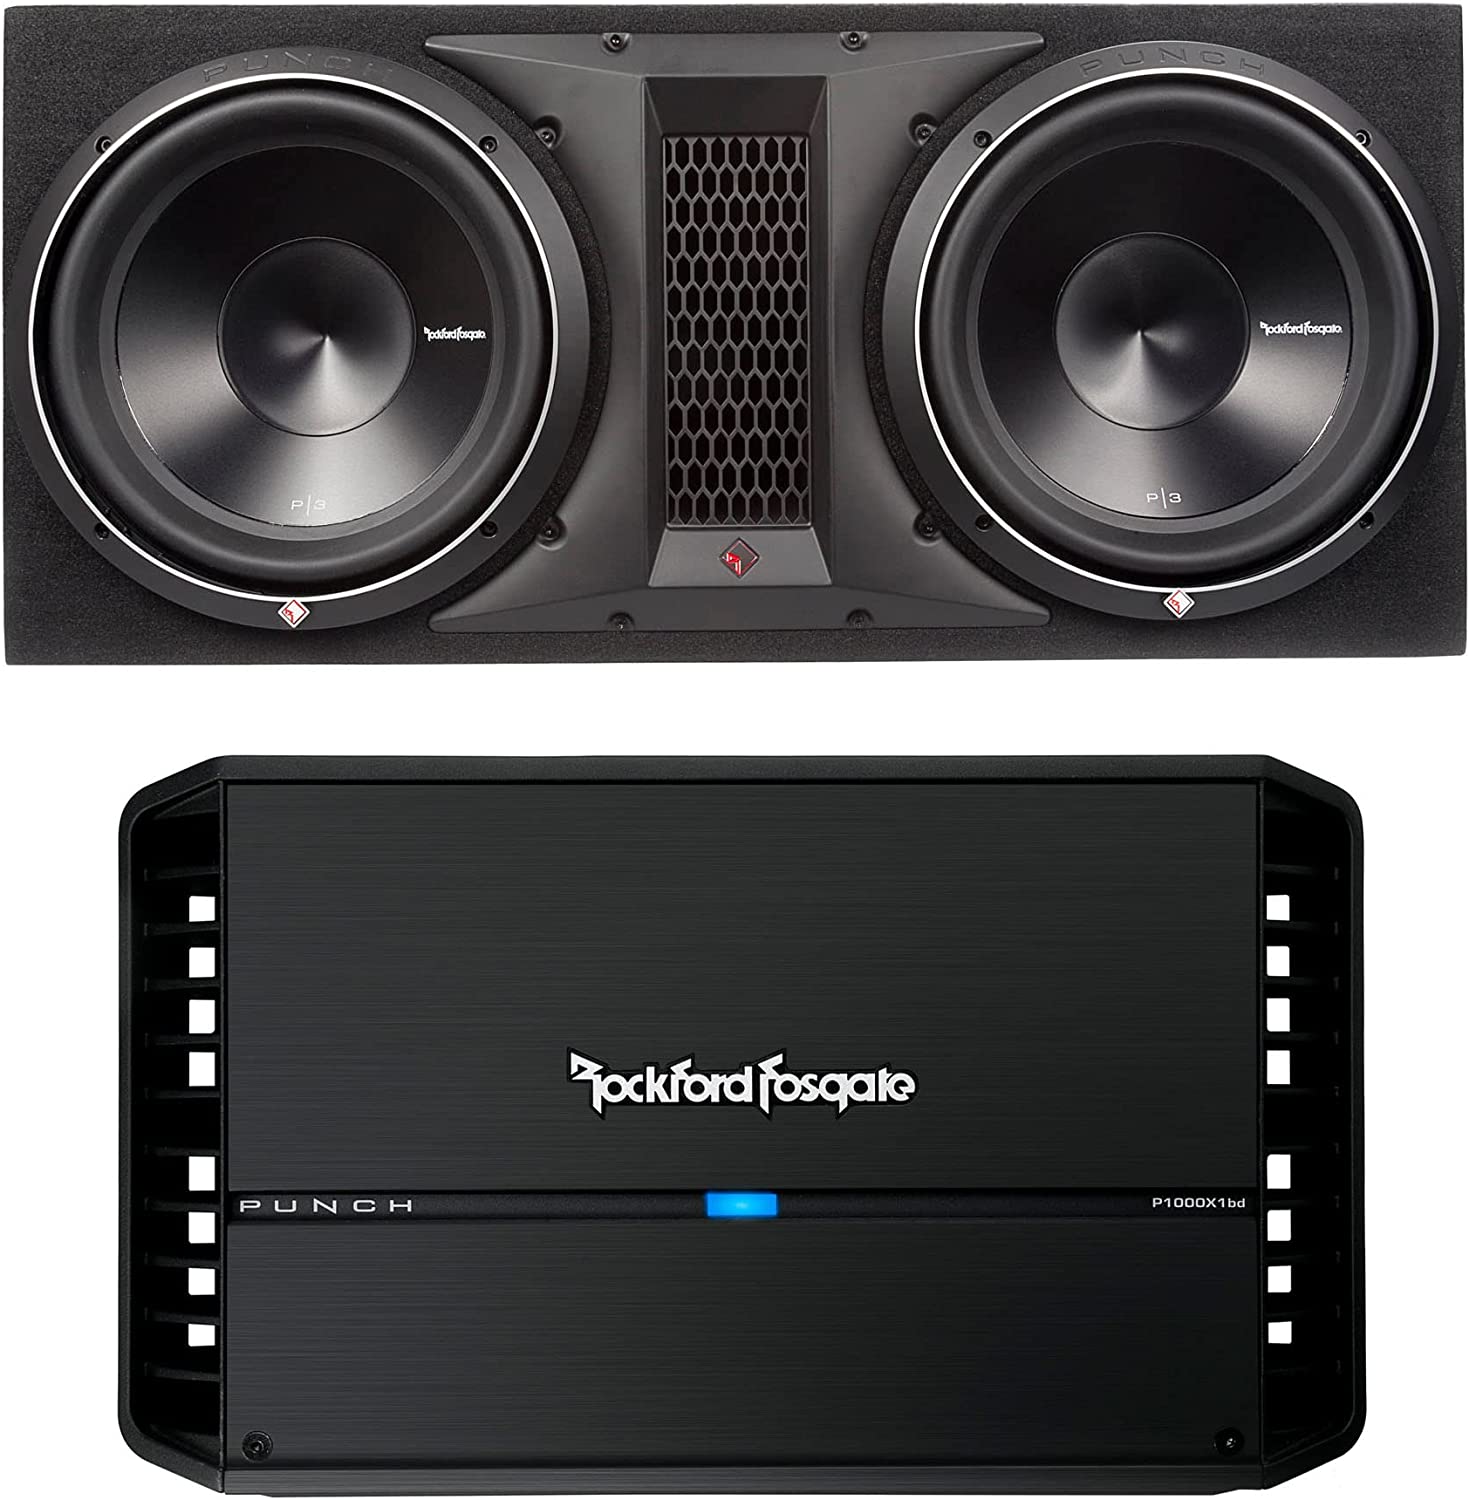 Rockford Fosgate Two Punch P3 12" Subwoofers in a Ported Enclosure with a Punch Series P1000X1bd Amplifier